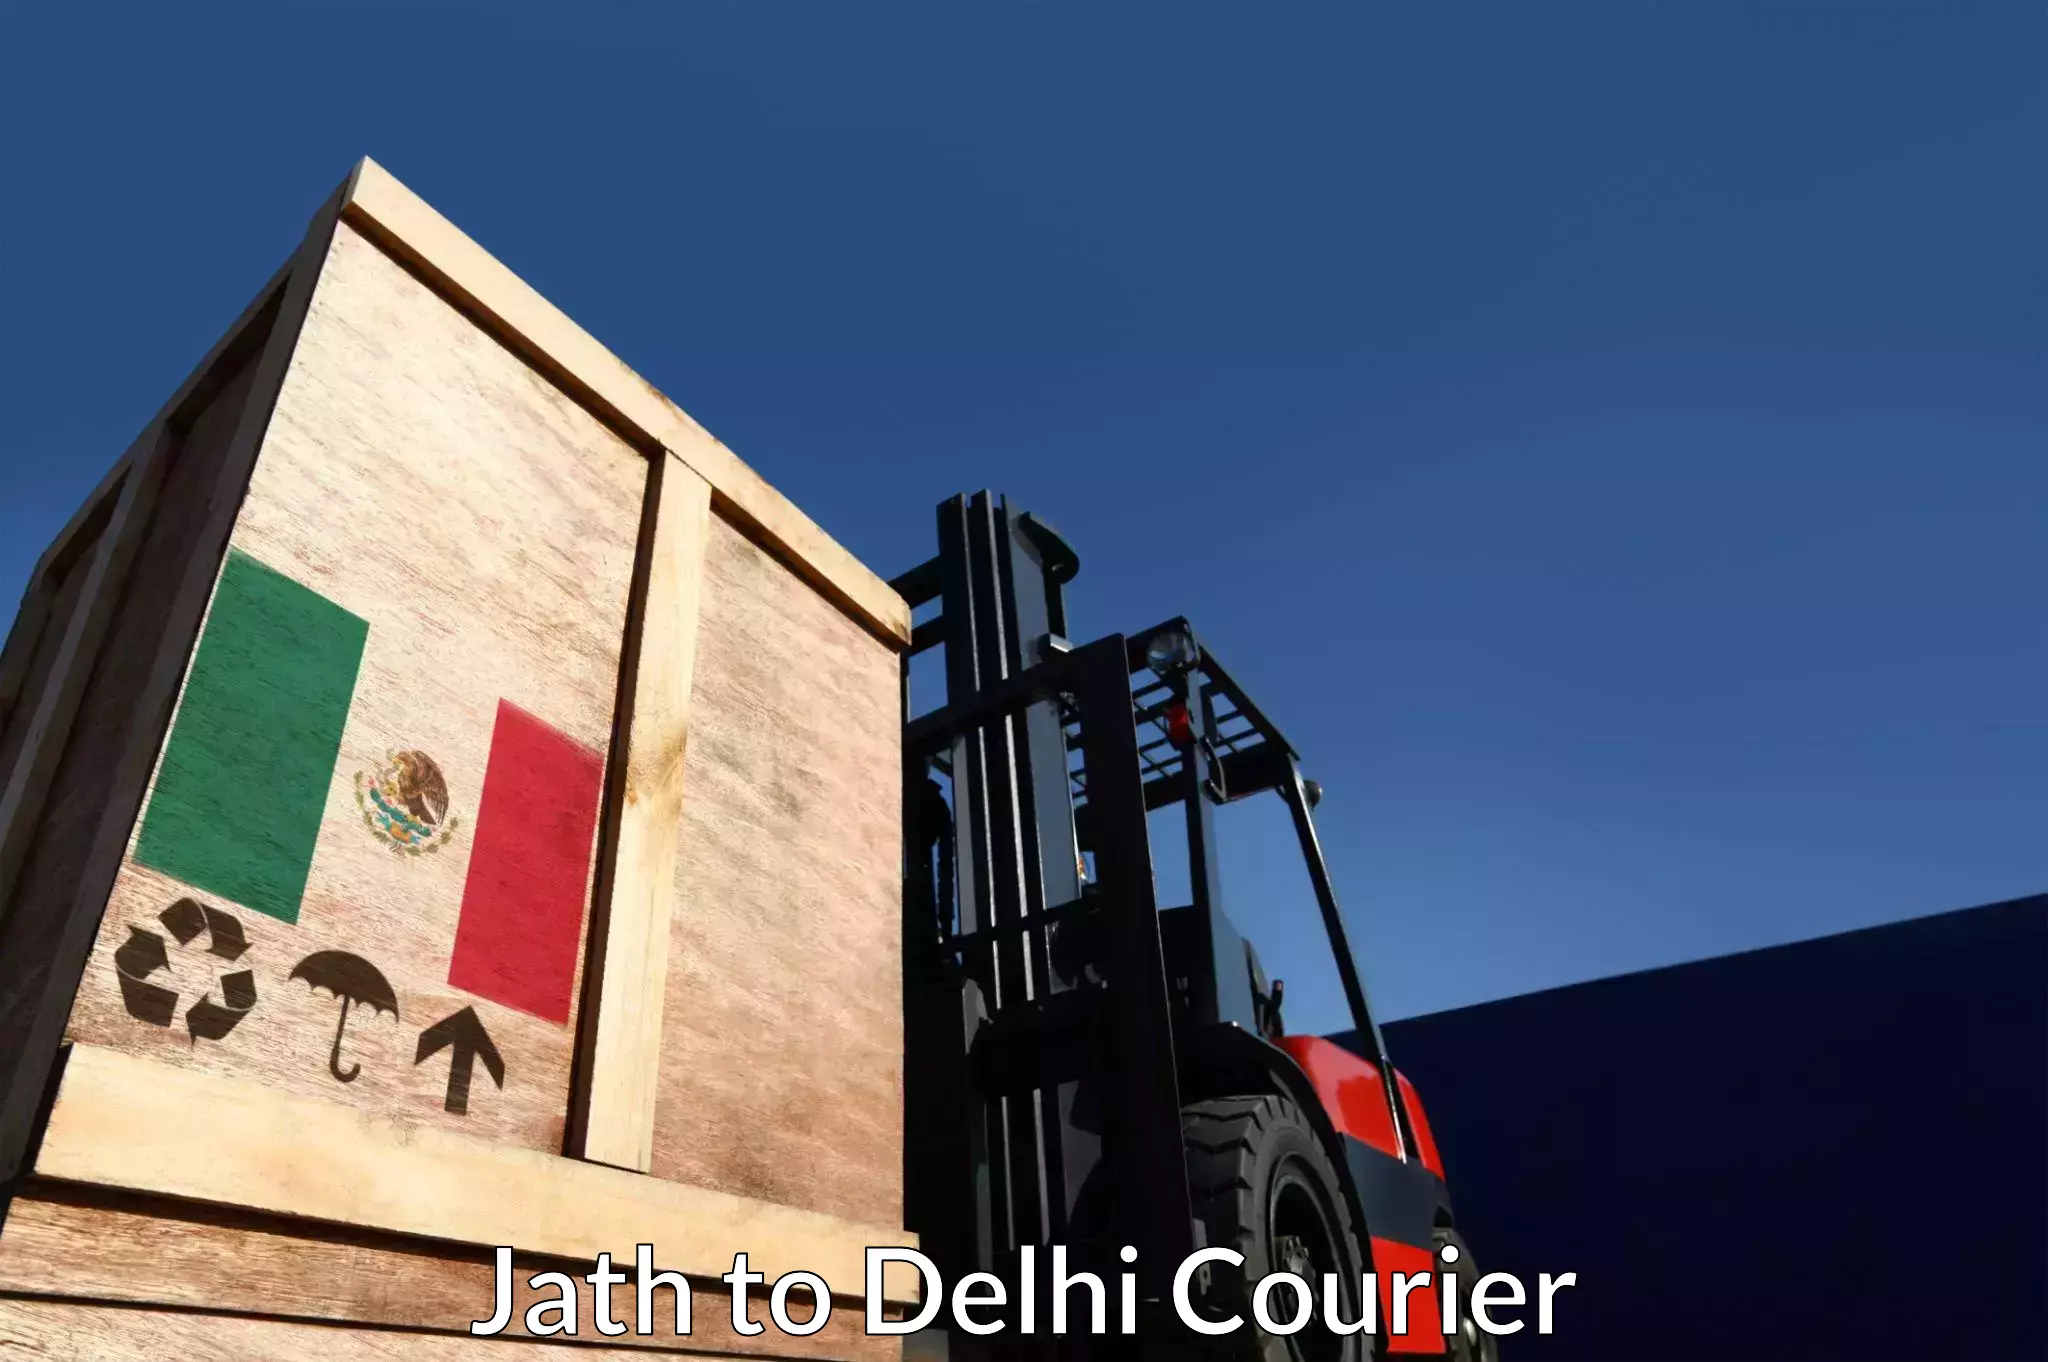 State-of-the-art courier technology Jath to Sarojini Nagar